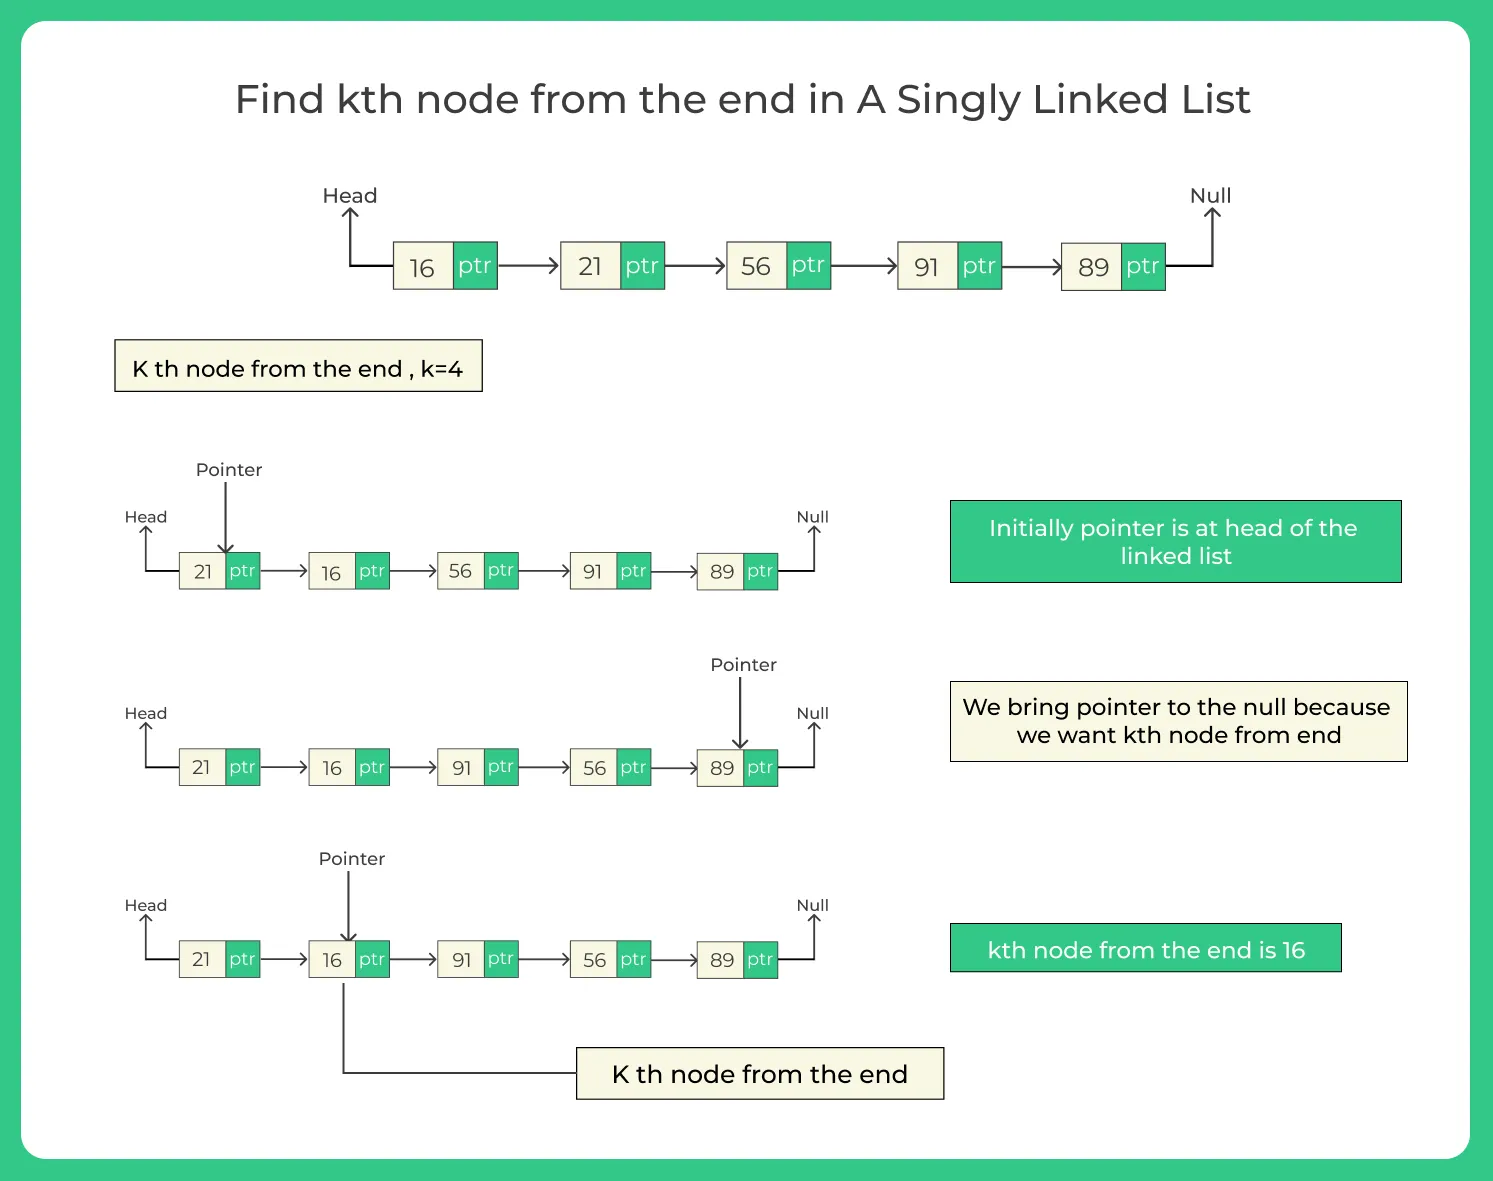 find kth node from the end in A Singly Linked List